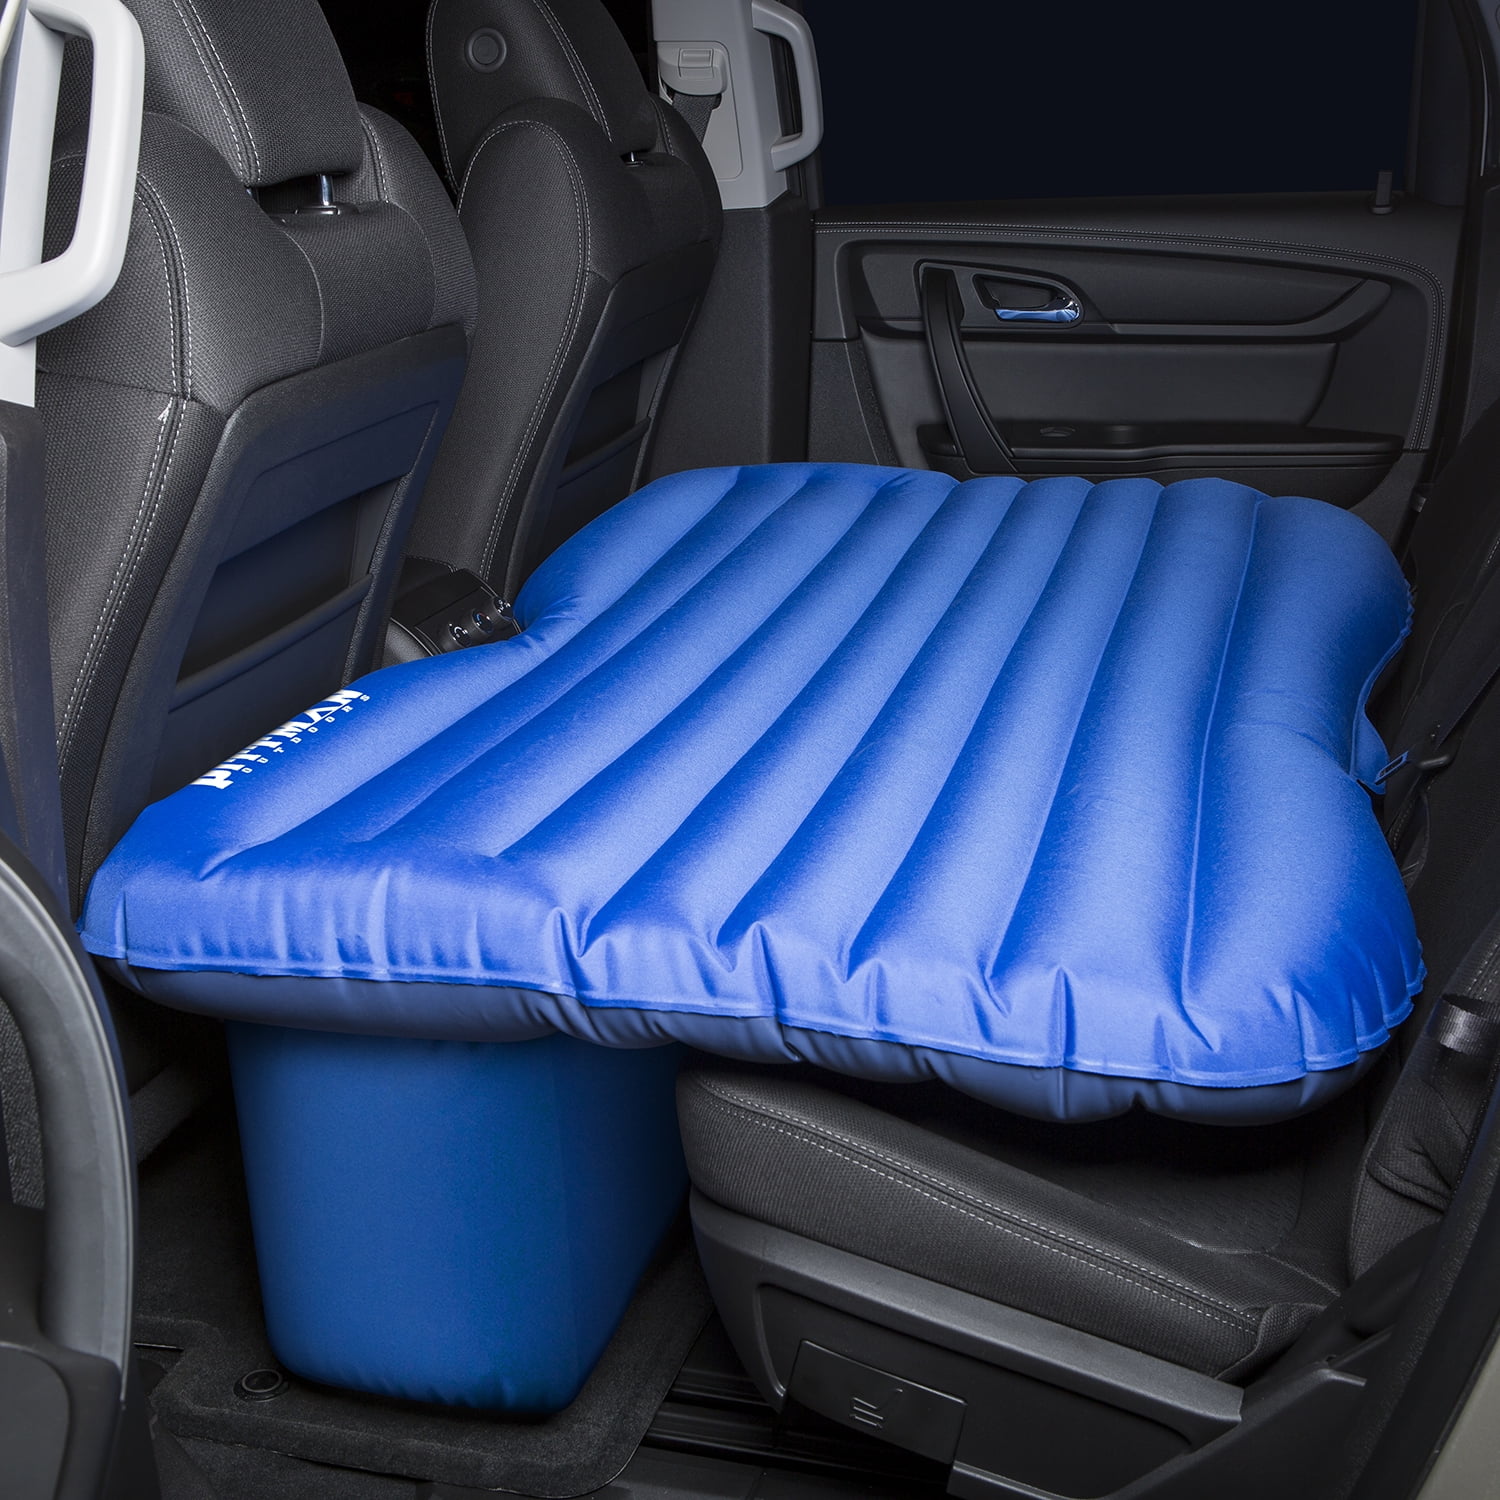 Auto Inflatable Car Bed Air Mattress Universal SUV Car Travel Sleeping Pad  Outdoor Camping Mat Accessories Parts From Pubao, $103.93